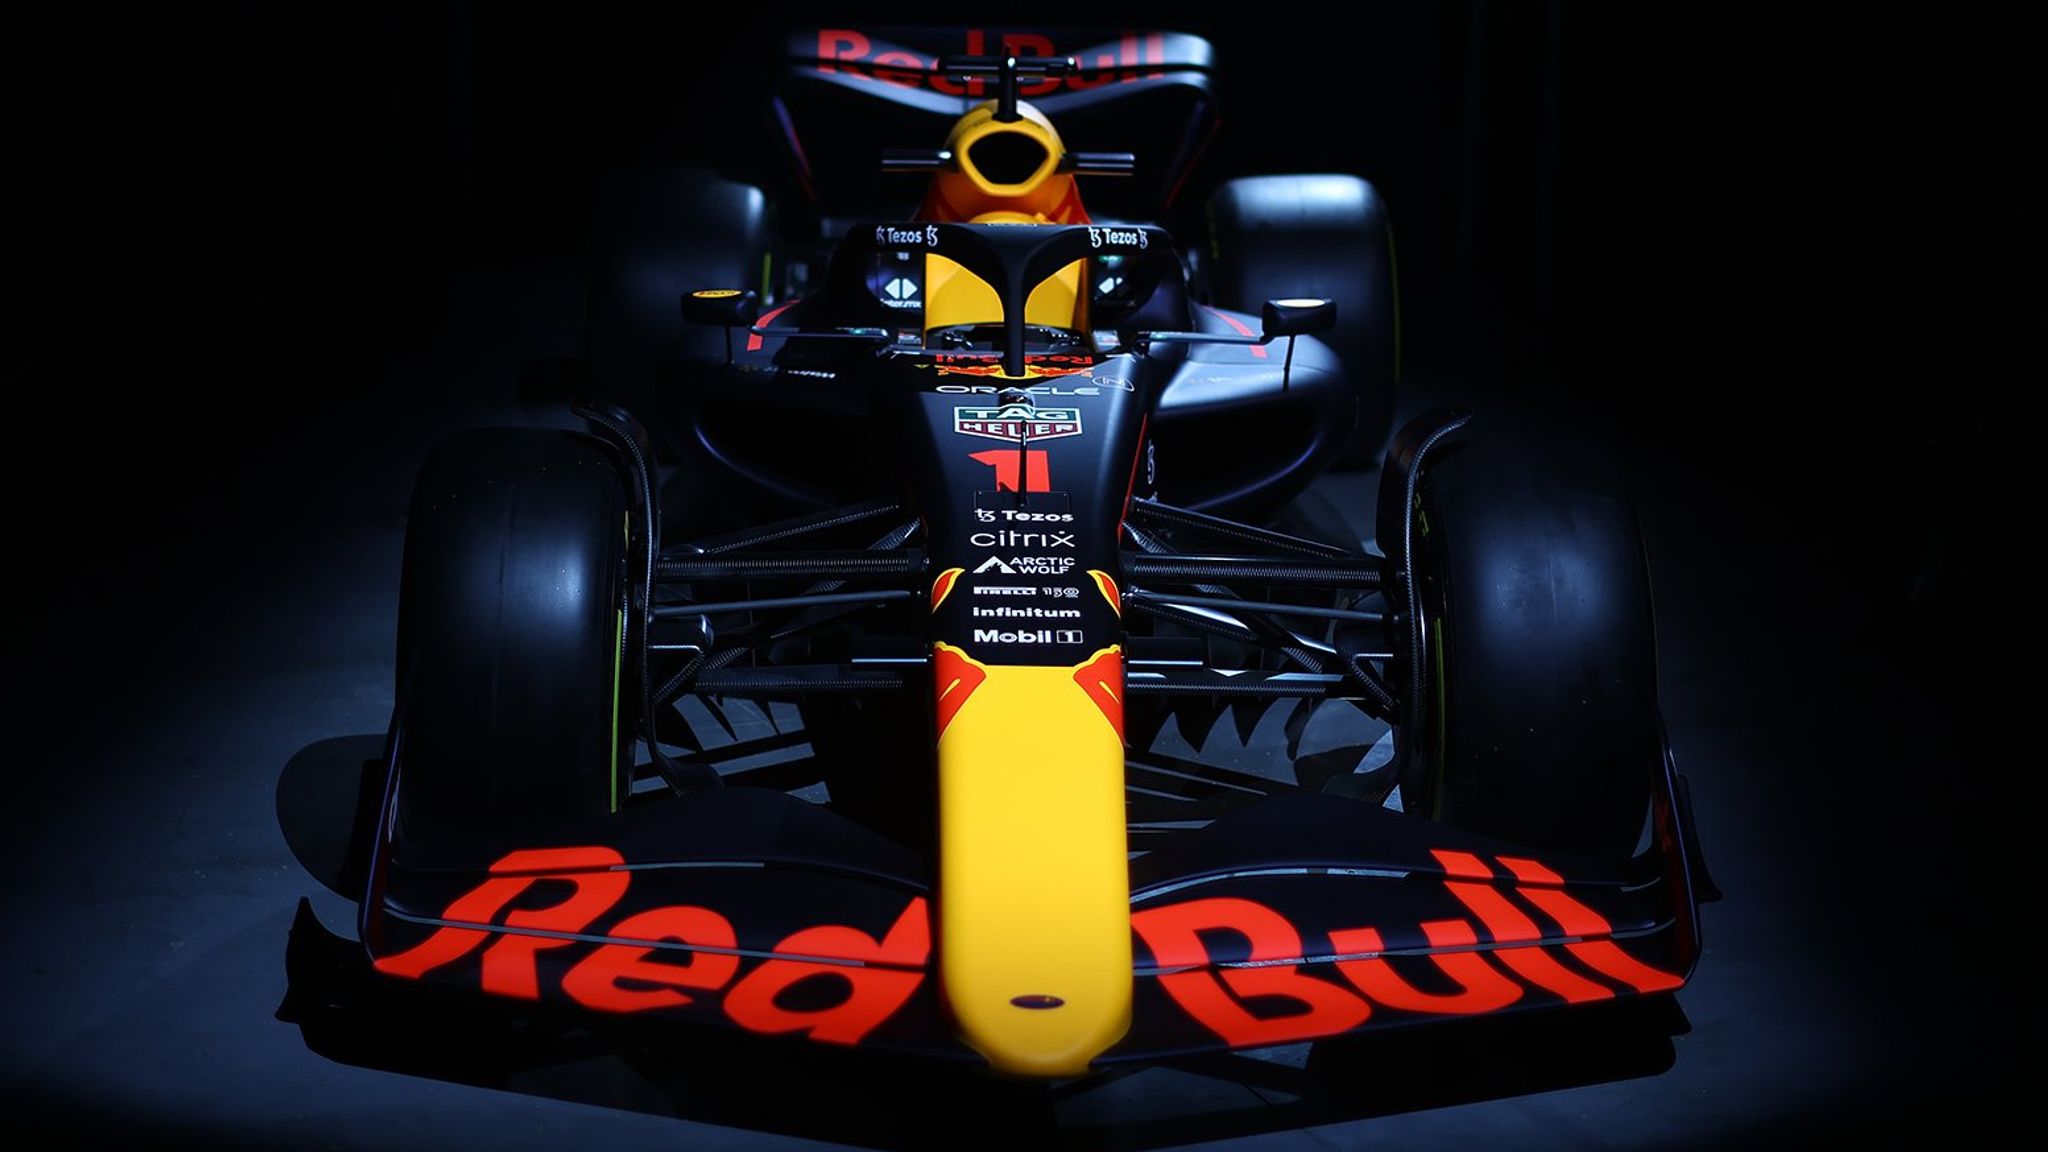 Red Bull reveal new car and title sponsor as team launch RB Max Verstappen's next title hopeful